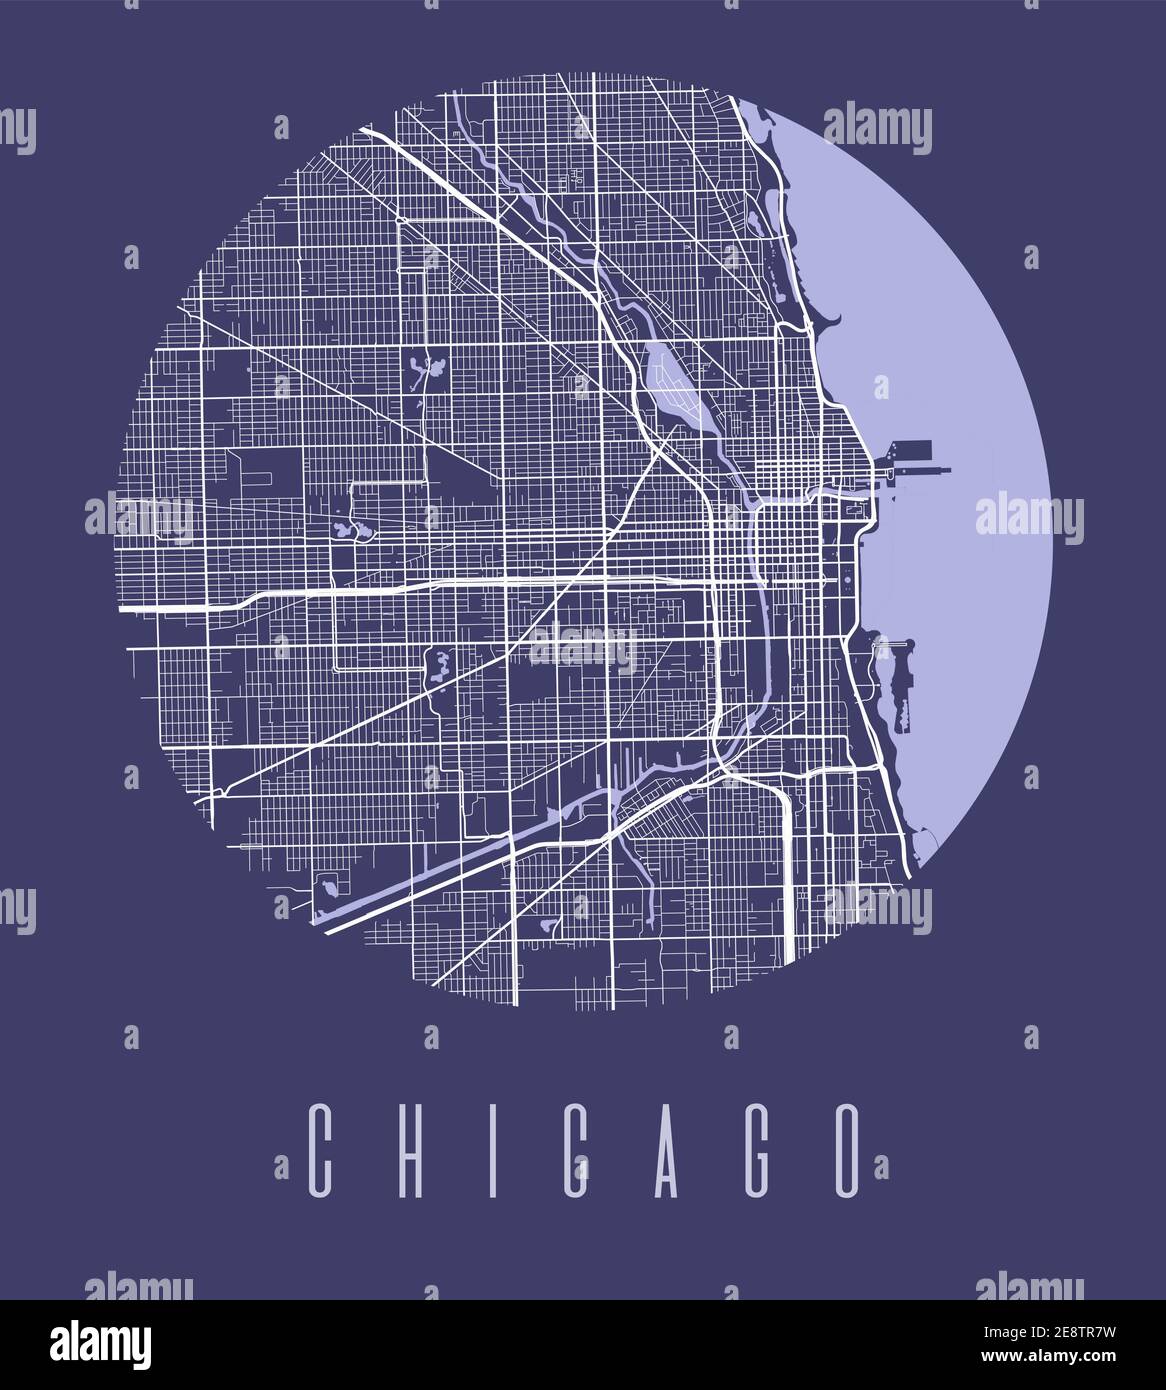 Chicago map poster. Decorative design street map of Chicago city. Cityscape aria panorama silhouette aerial view, typography style. Land, river, highw Stock Vector